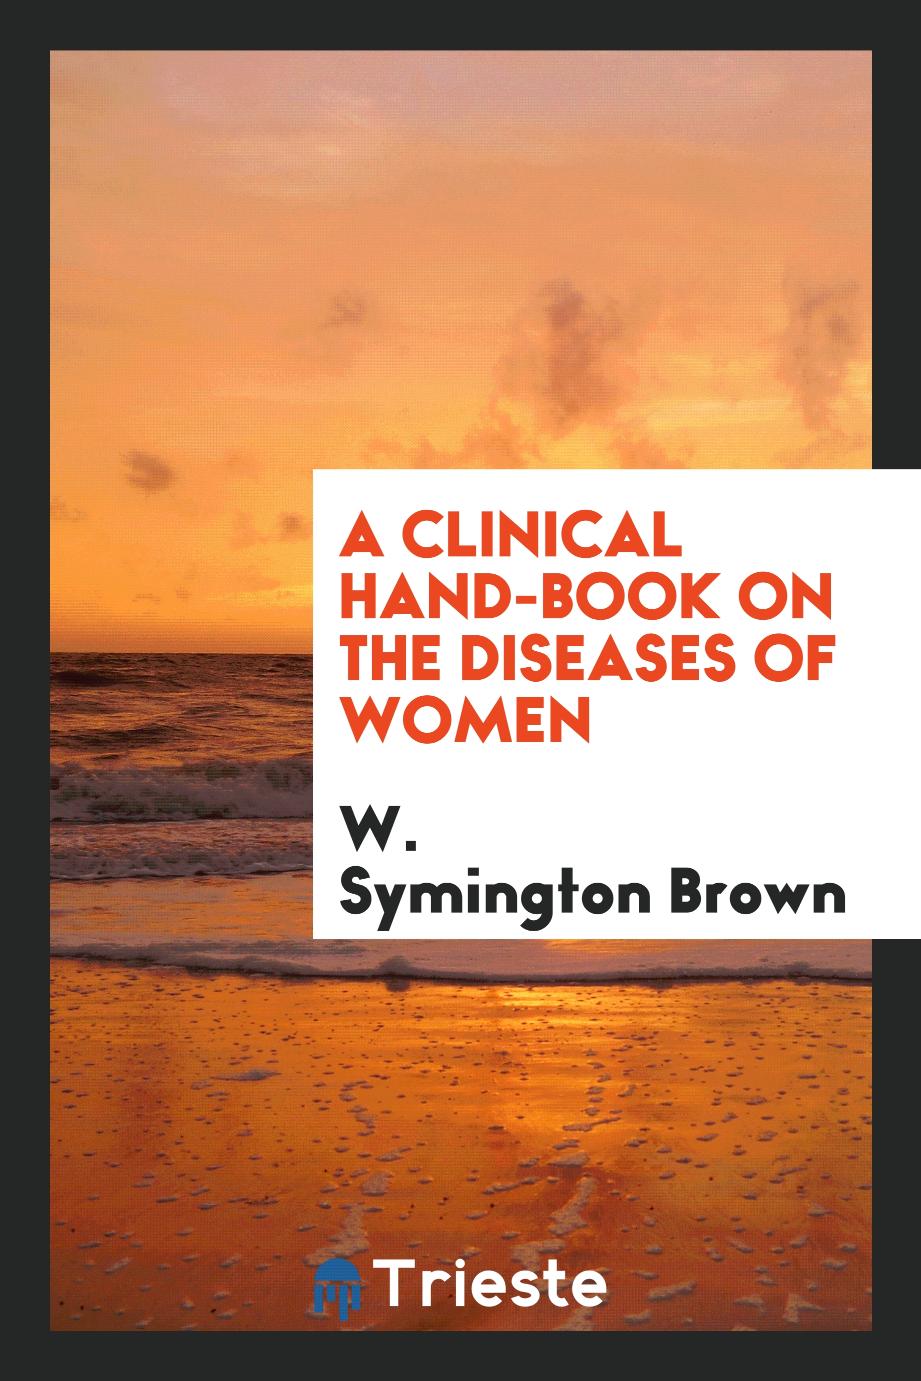 A Clinical Hand-Book on the Diseases of Women